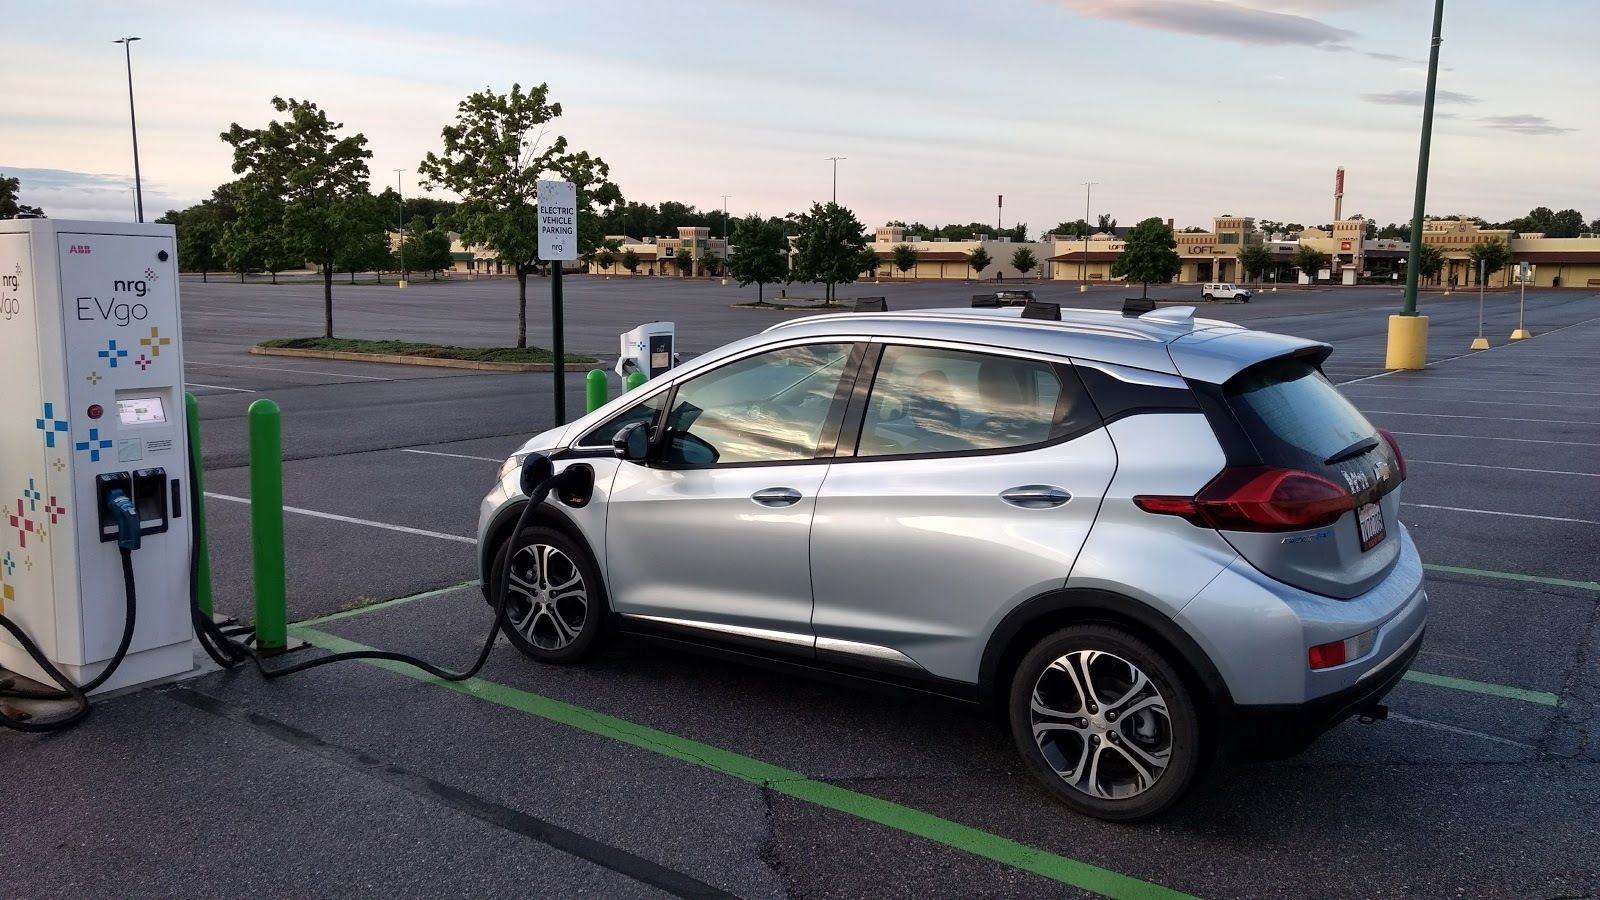 Chevy Bolt EV fast-charging at EVgo station before trip across Maryland    [image: Brian Ro]